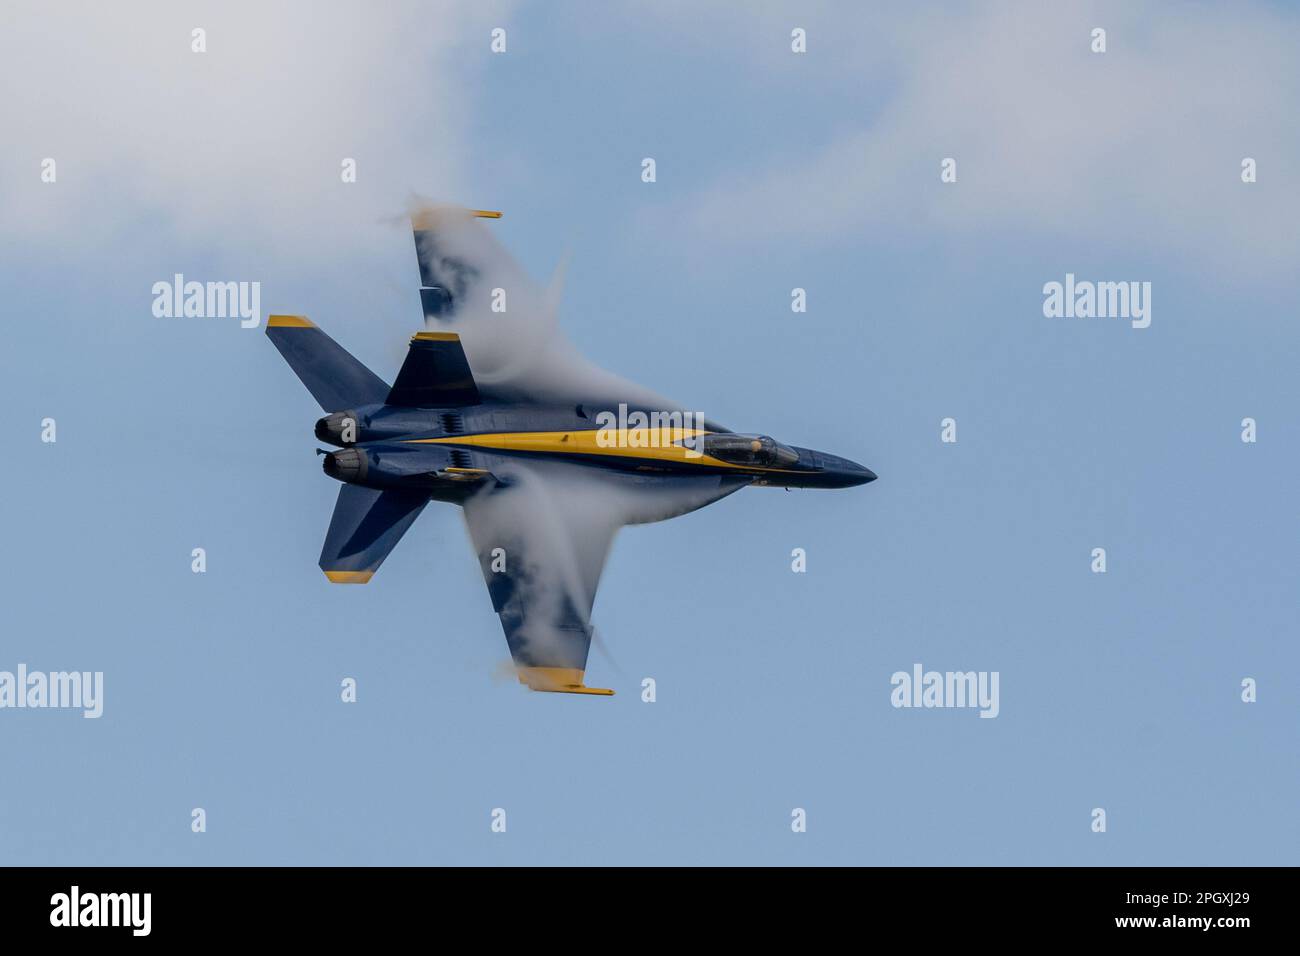 U.S. Navy Flight Demonstration Team, the Blue Angels, perform an aerial maneuver during a practice demonstration prior to the 2023 Defenders of Liberty Air Show, at Barksdale Air Force Base, La., March 23, 2023. The air show is scheduled to showcase performances from the F-22 Raptor Demo Team, the U.S. Navy Flight Demonstration Team, the Blue Angels and a host of aerial performers. (U.S. Air Force photo by Airman 1st Class Nicole Ledbetter) Stock Photo